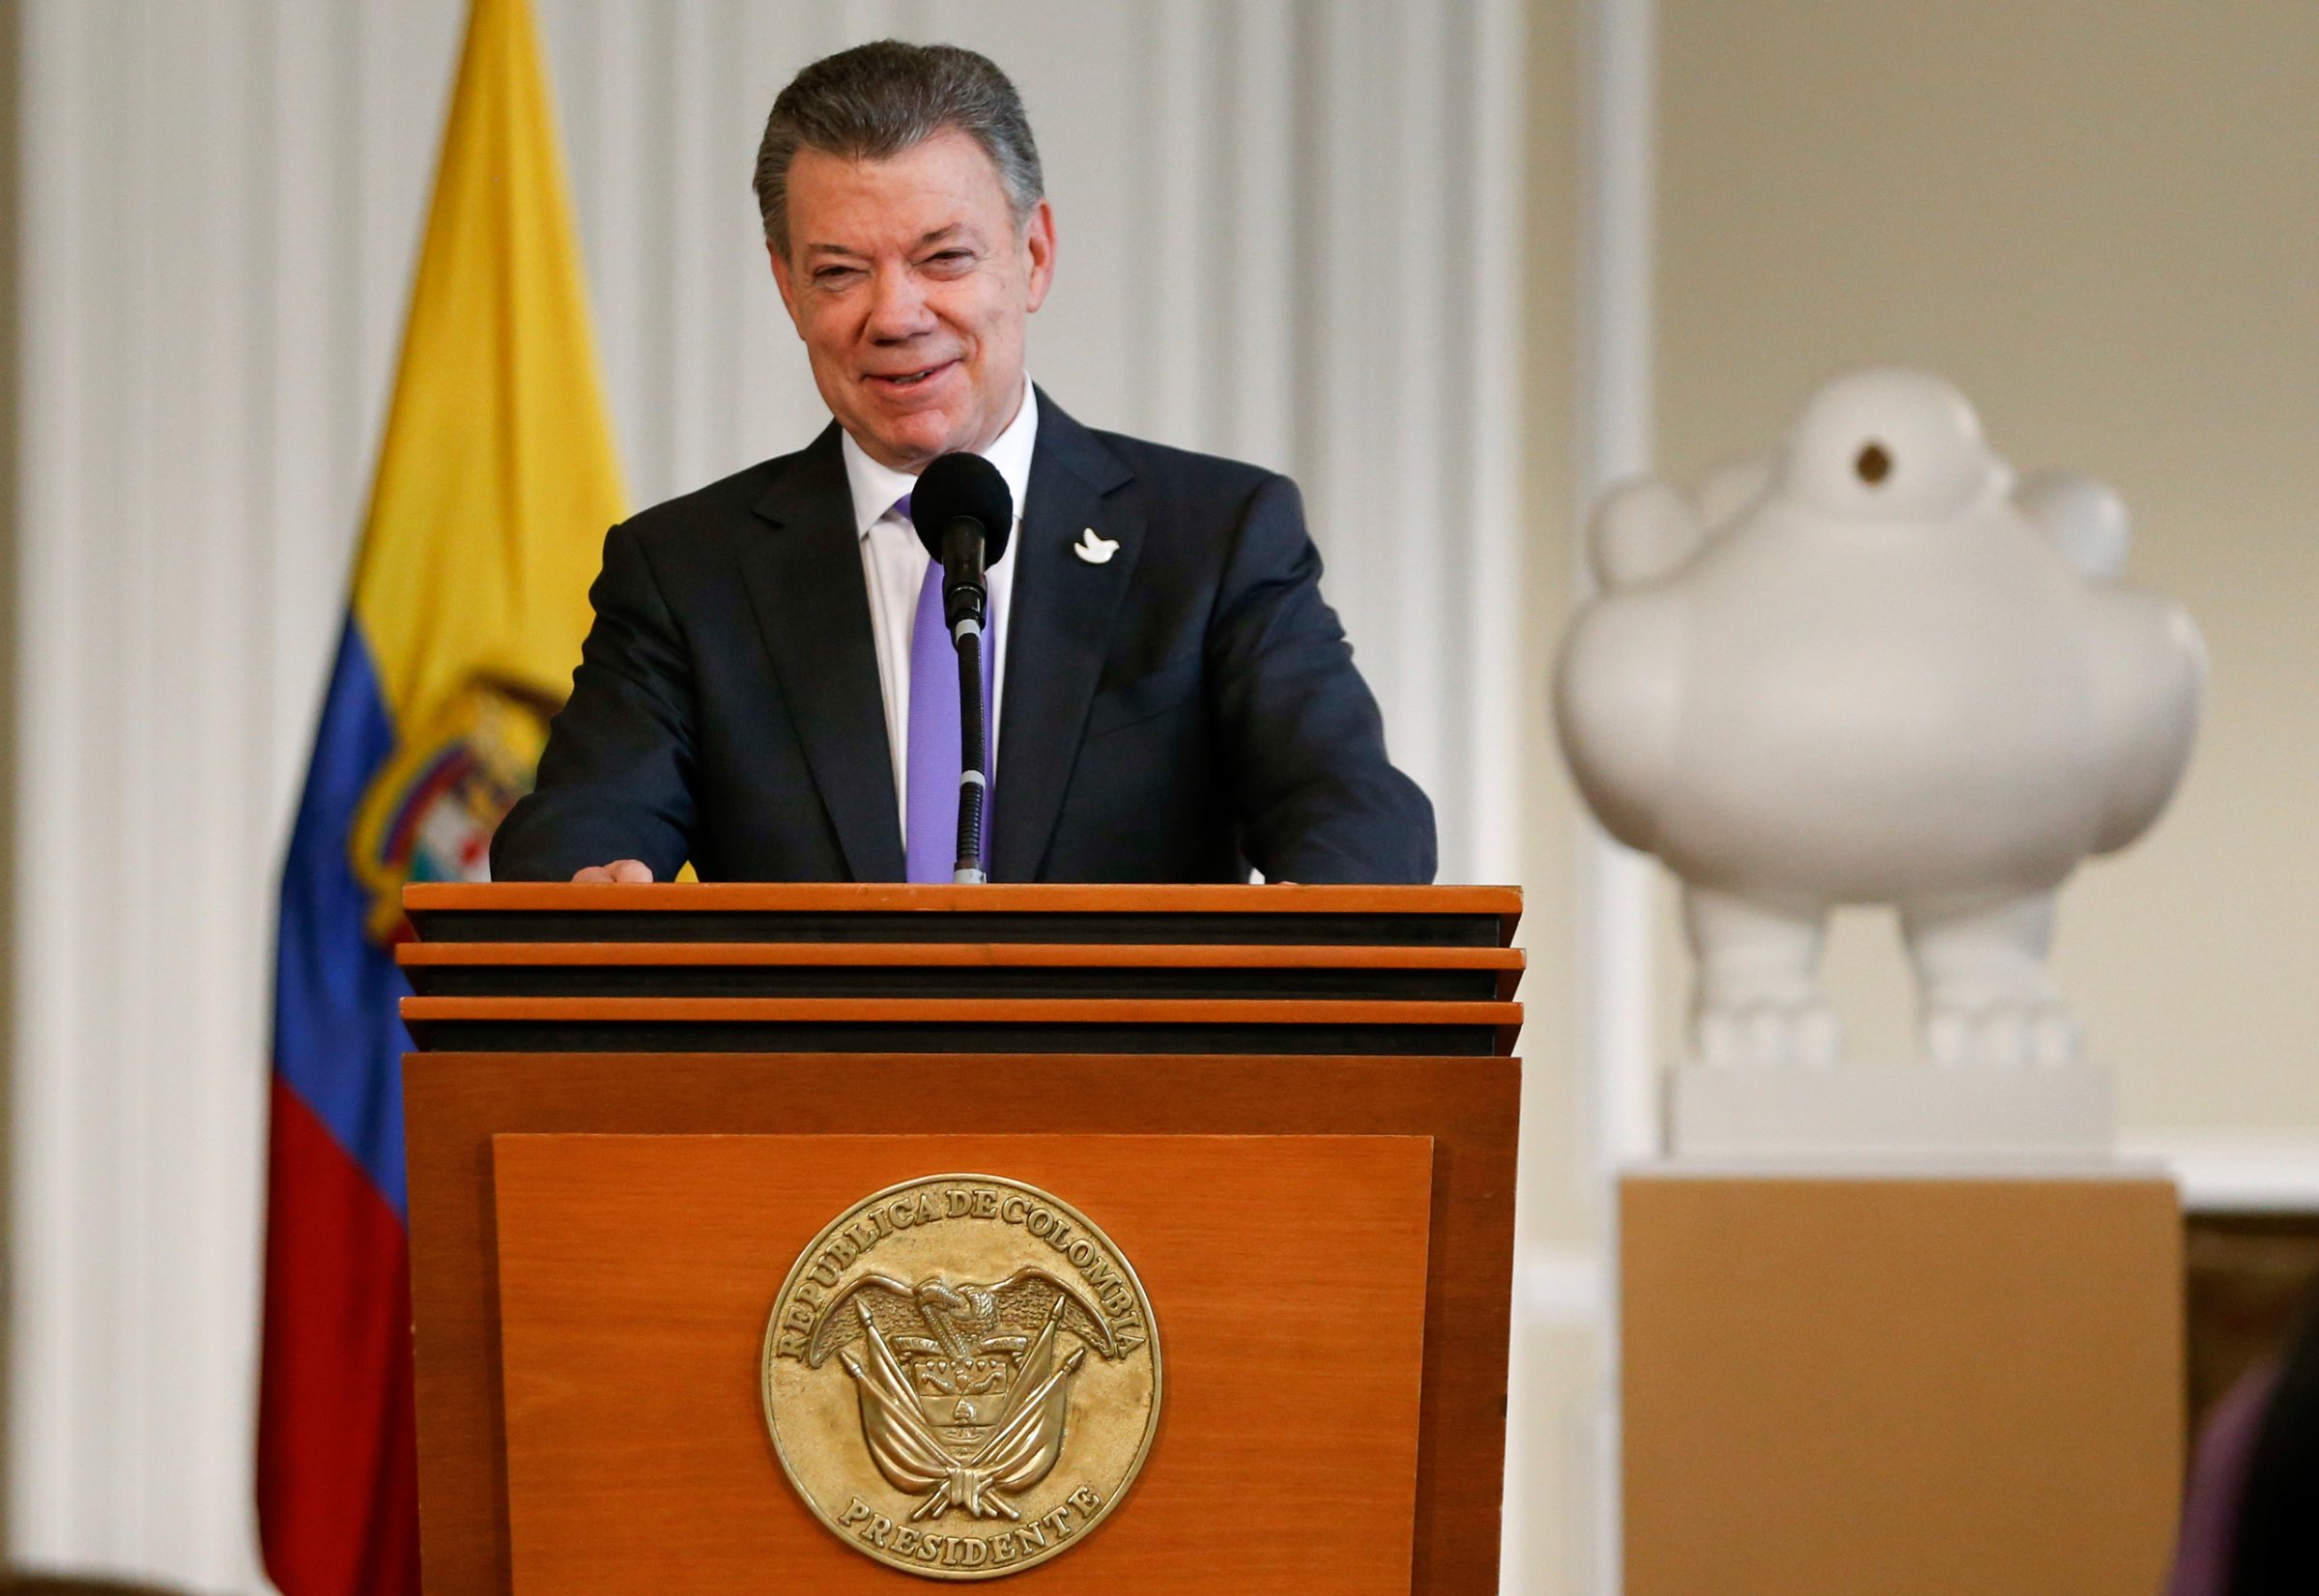 Colombia's President Juan Manuel Santos speaks to supporters of the peace deal he signed with rebels of the Revolutionary Armed Forces of Colombia, FARC, at the presidential palace in Bogota, Colombia, Friday, Oct. 7, 2016, behind a sculpture of a white dove donated by Colombian artist Fernando Botero. Santos won the Nobel Peace Prize Friday, just days after voters narrowly rejected a peace deal. (AP Photo/Fernando Vergara)